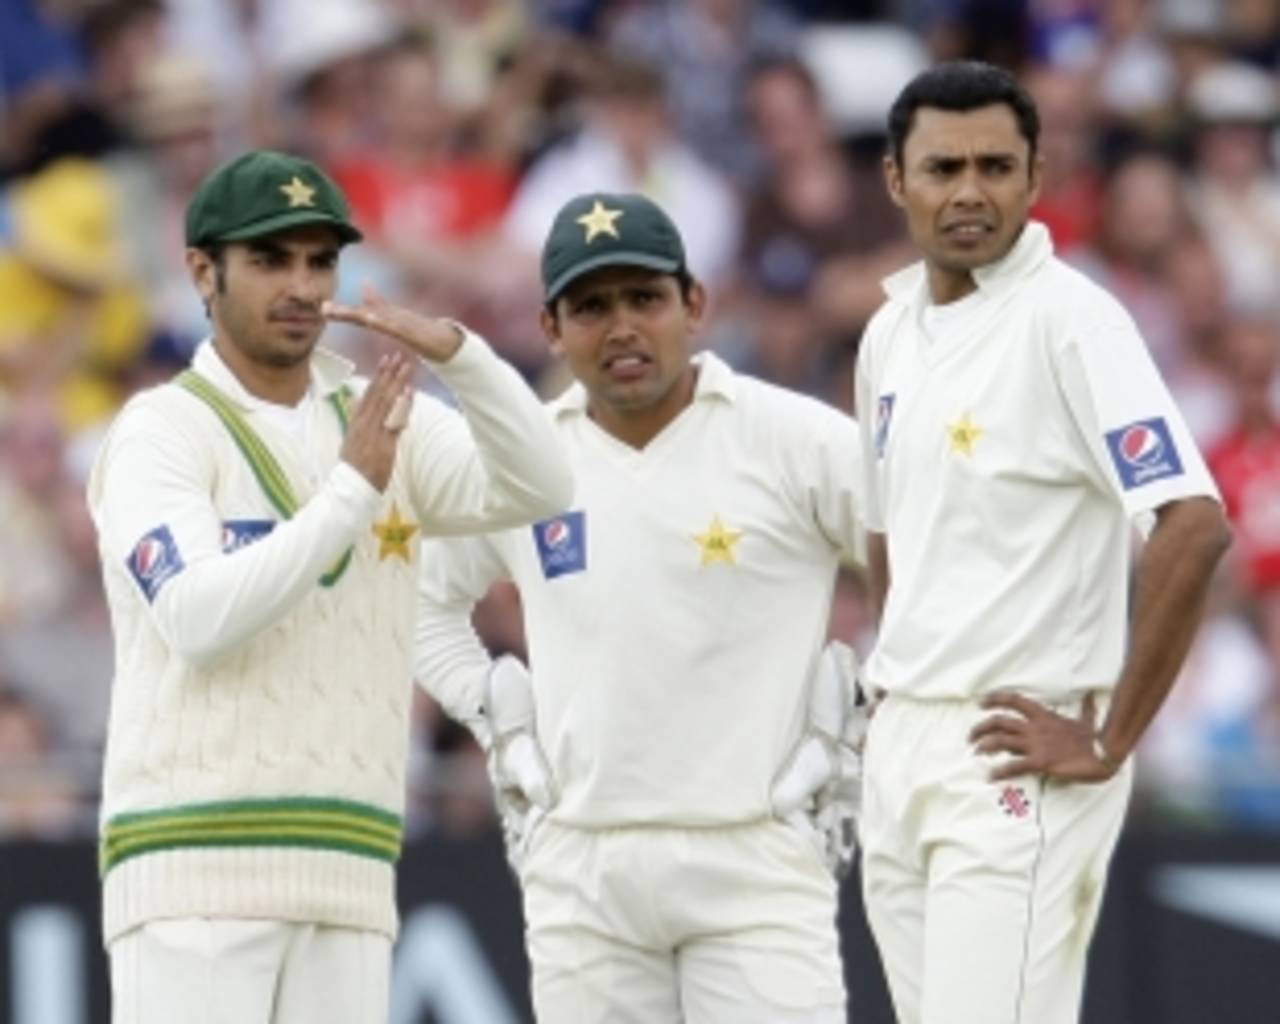 Danish Kaneria picked up his first wicket of the innings when an lbw decision against Graeme Swann was referred, England v Pakistan, 1st Test, Trent Bridge, 3rd day, July 31, 2010